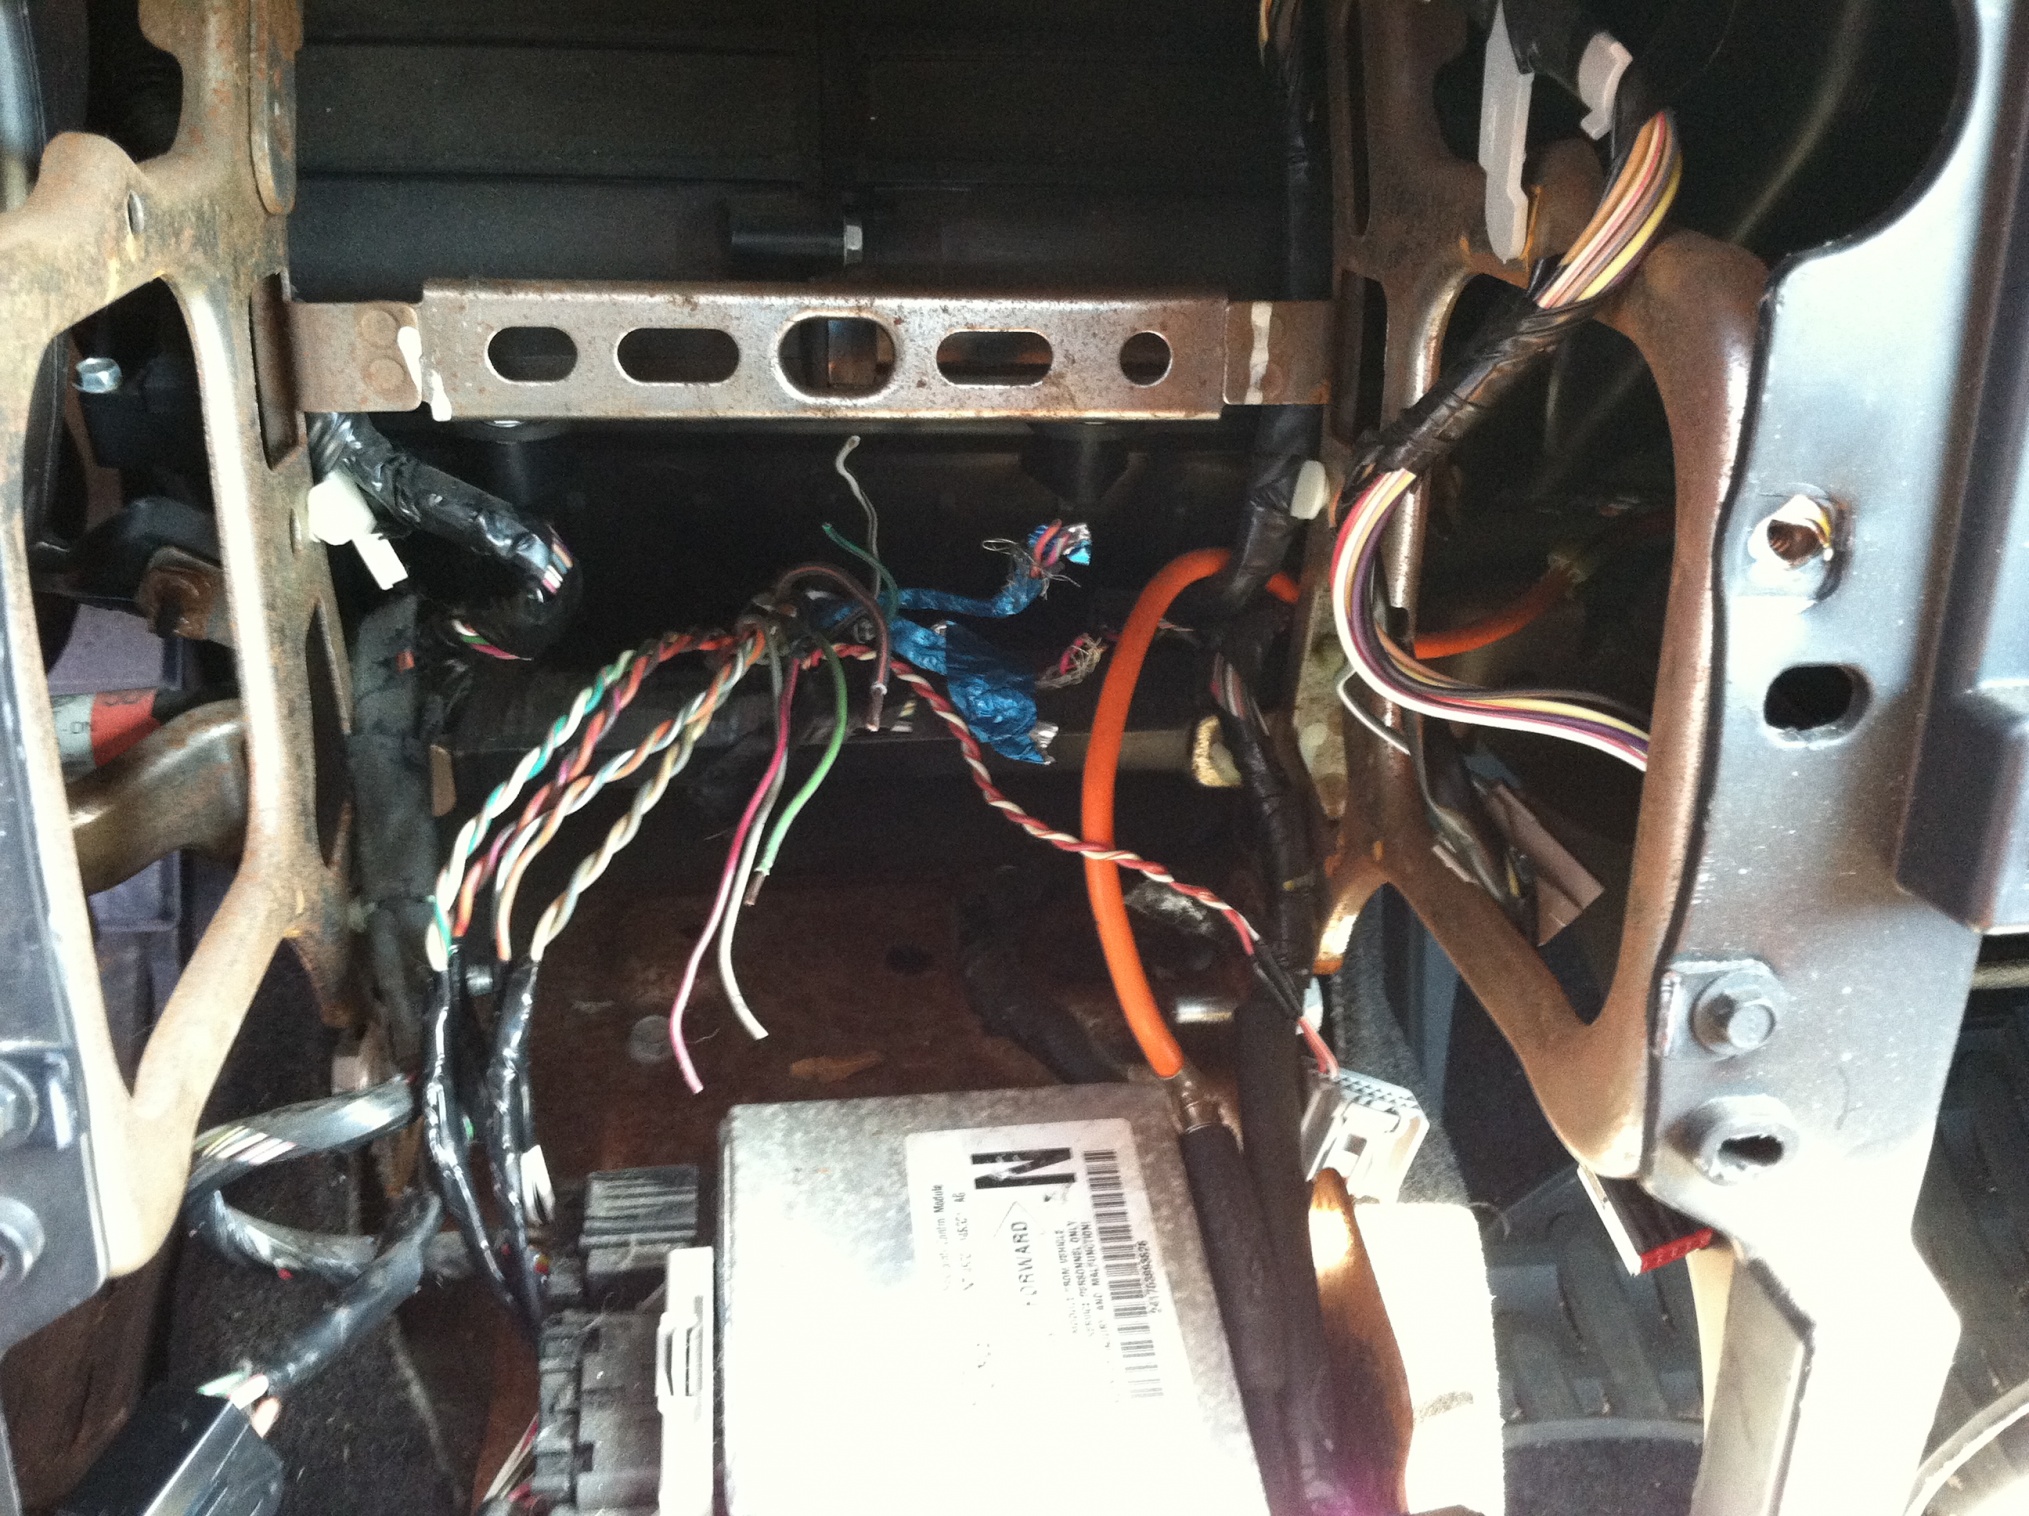 2005 Ford Mustang Wiring Diagram from themustangsource.com